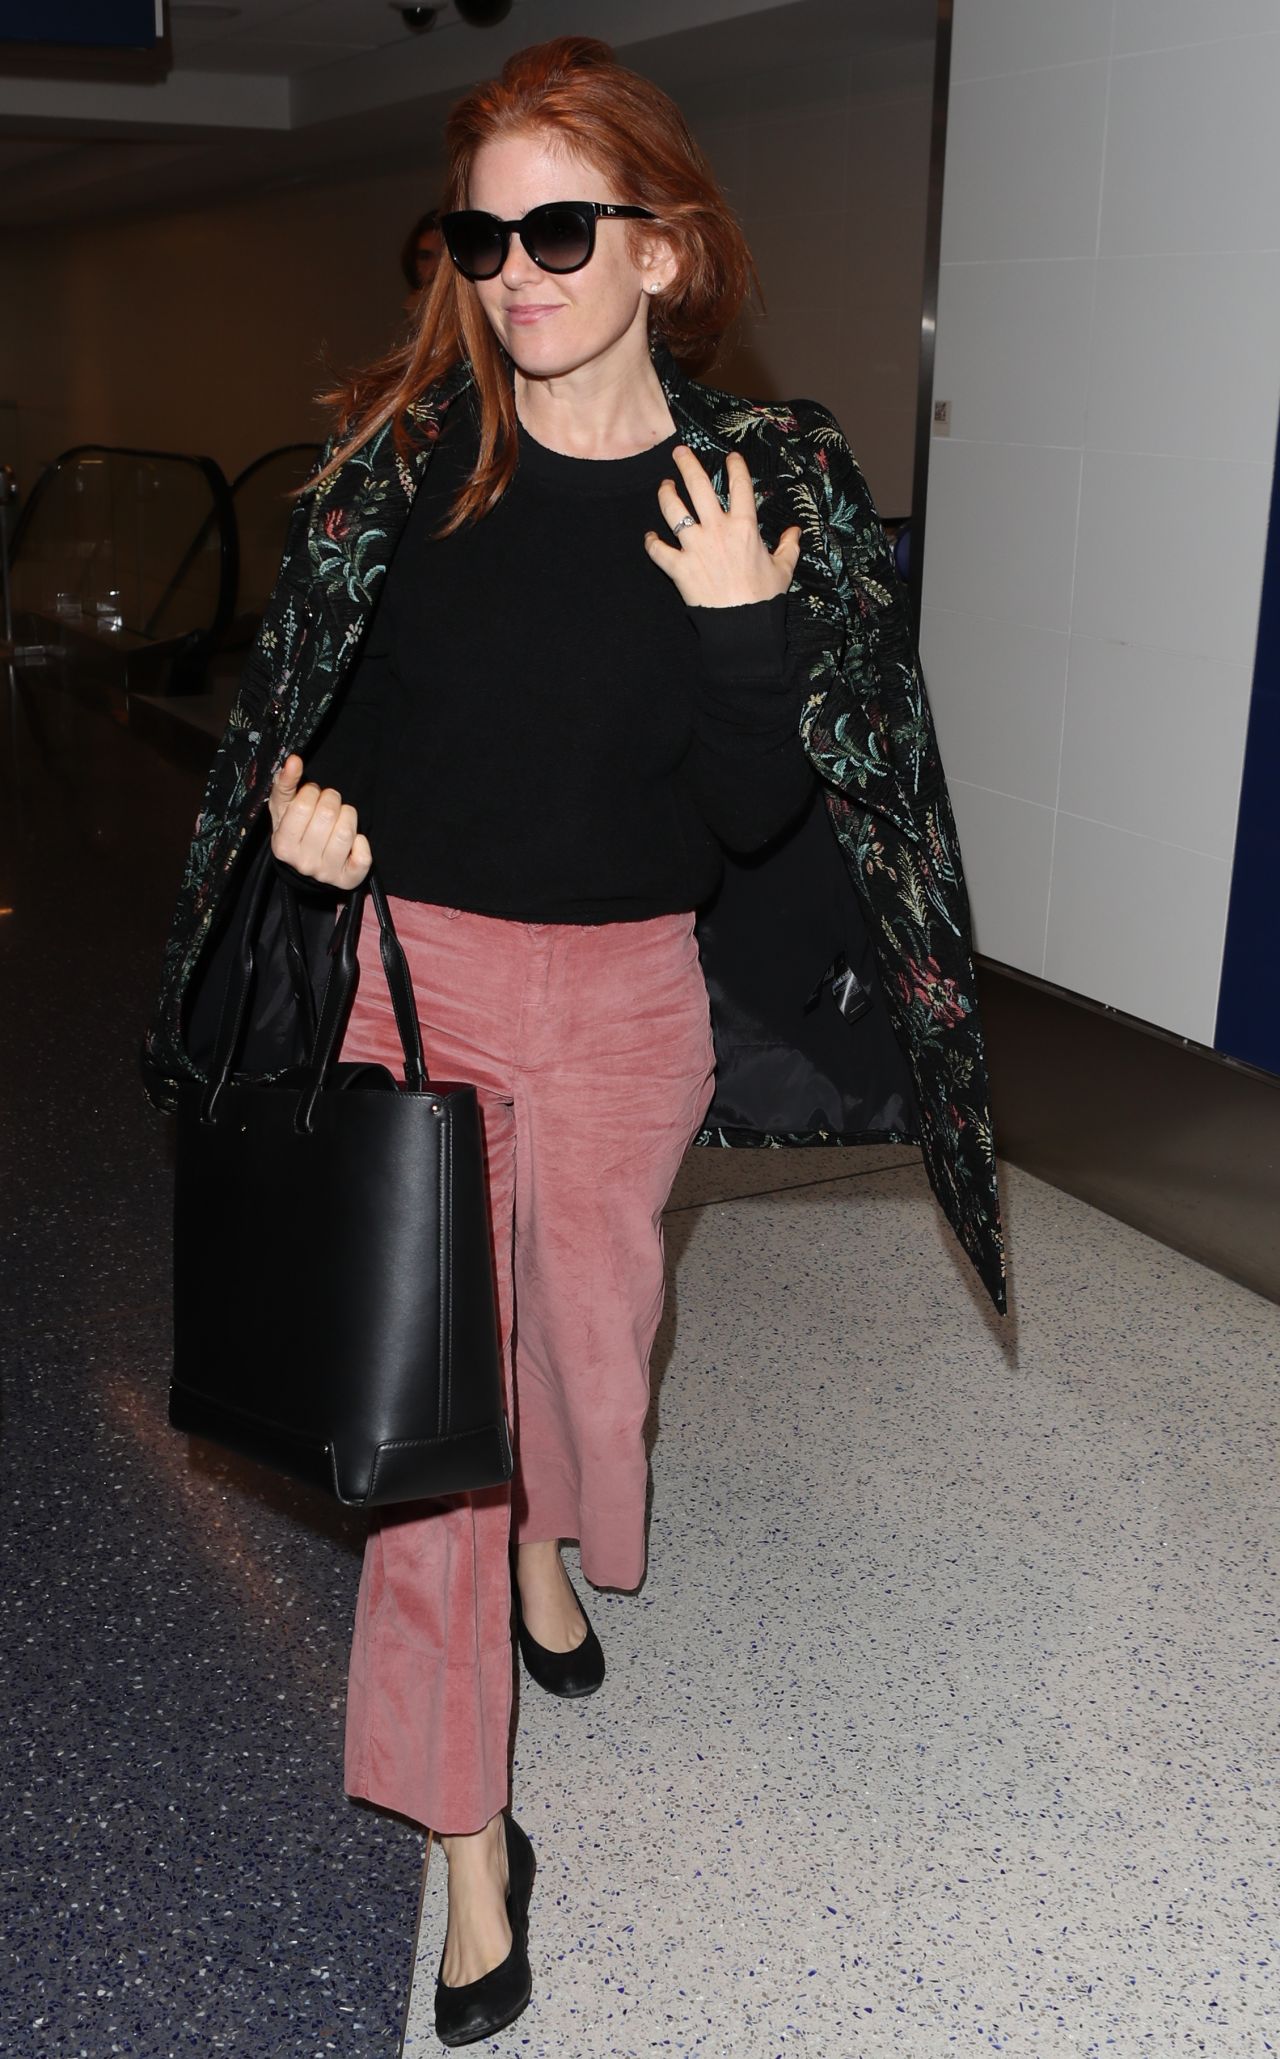 Isla Fisher in Comfy Travel Outfit at LAX Airport in Los Angeles